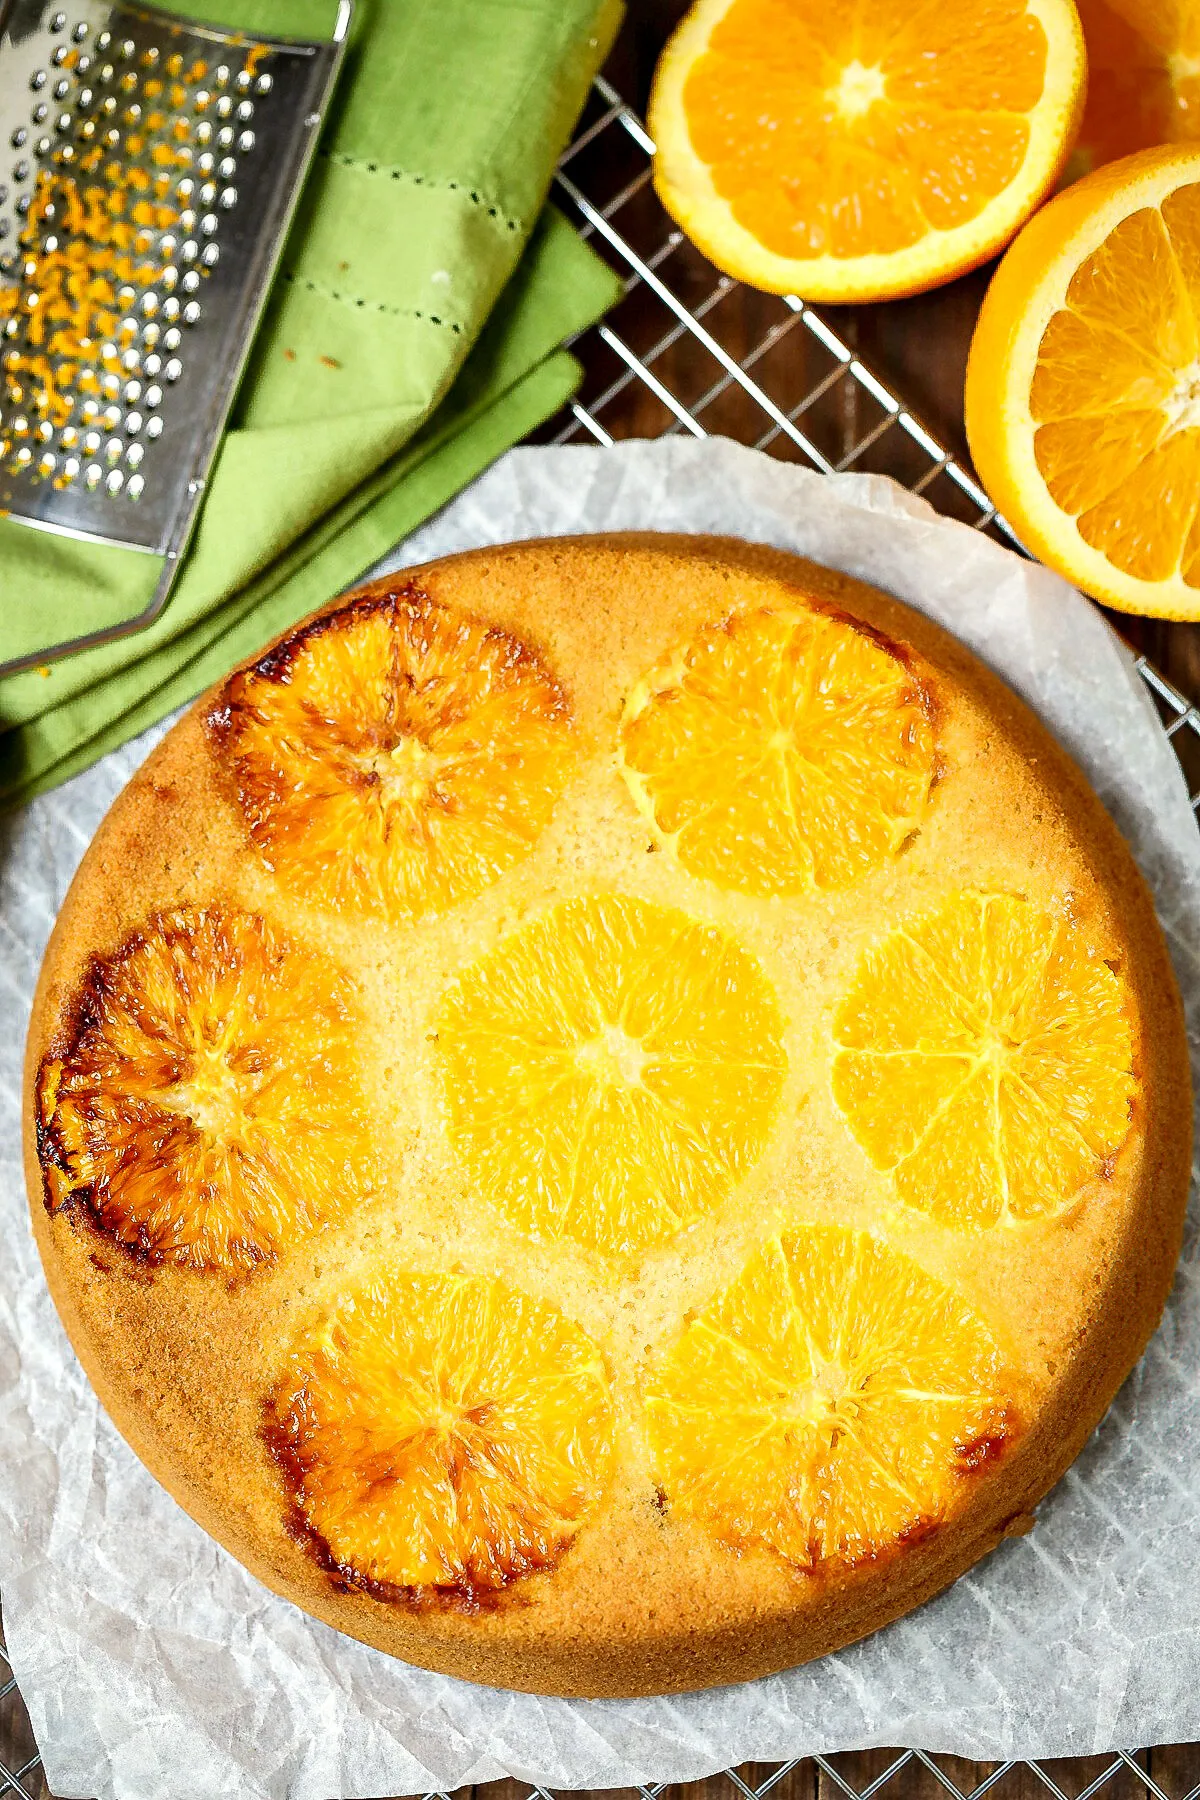 This easy to make Orange Buttermilk Upside-Down Cake is a twist on the classic. A rich and delicious dessert your whole family will love!